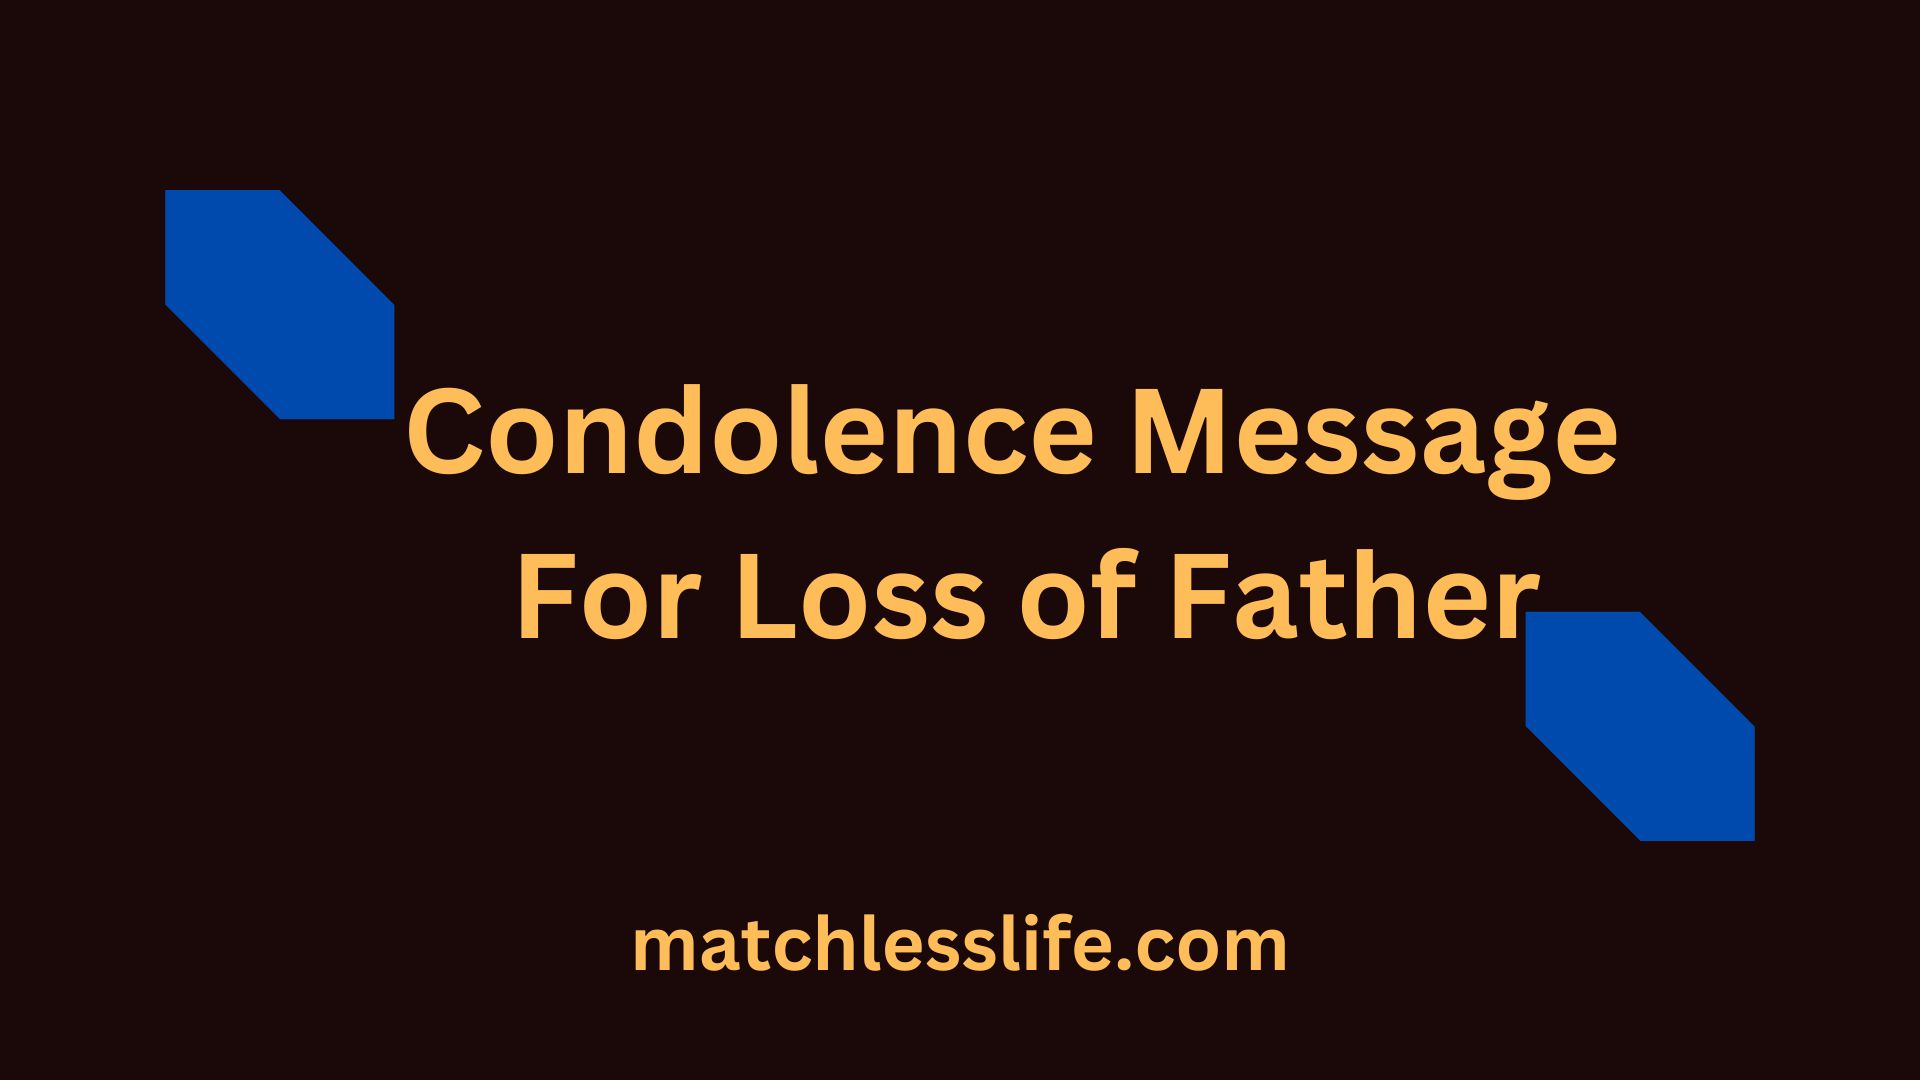 Short Condolence Message For Loss of Father